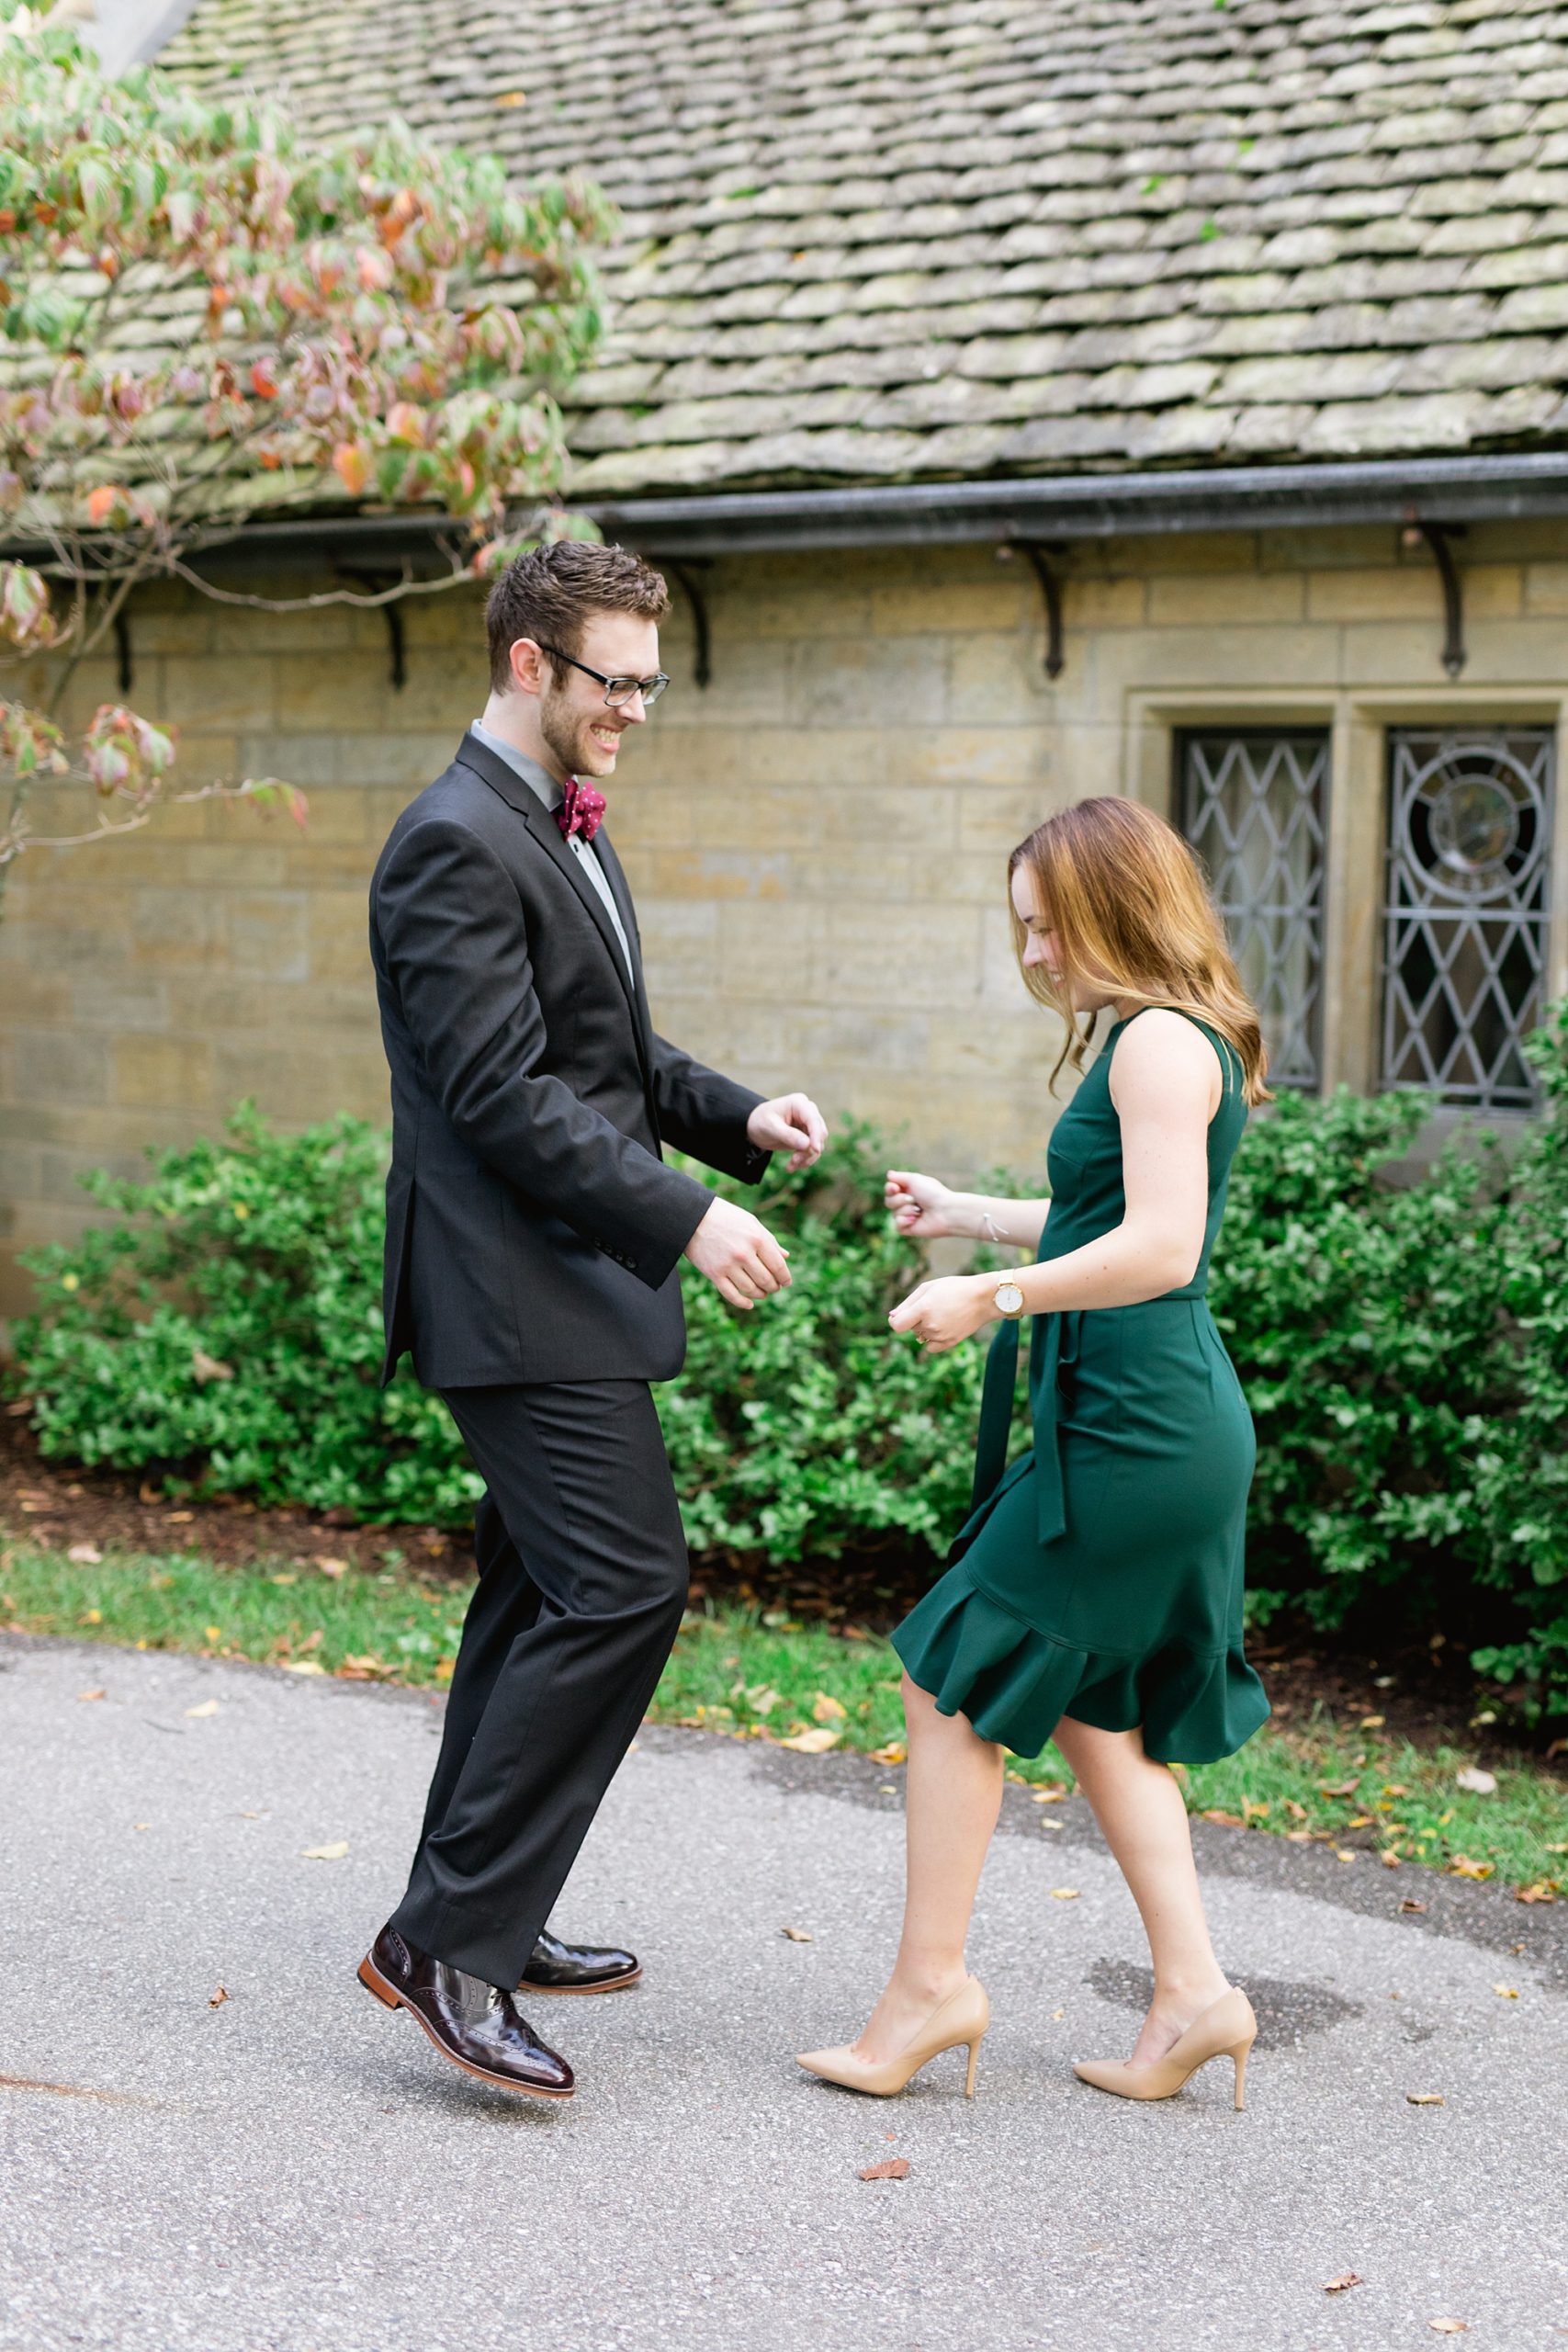 Dancing Engagement Shoot by Brianne Rochelle Photography